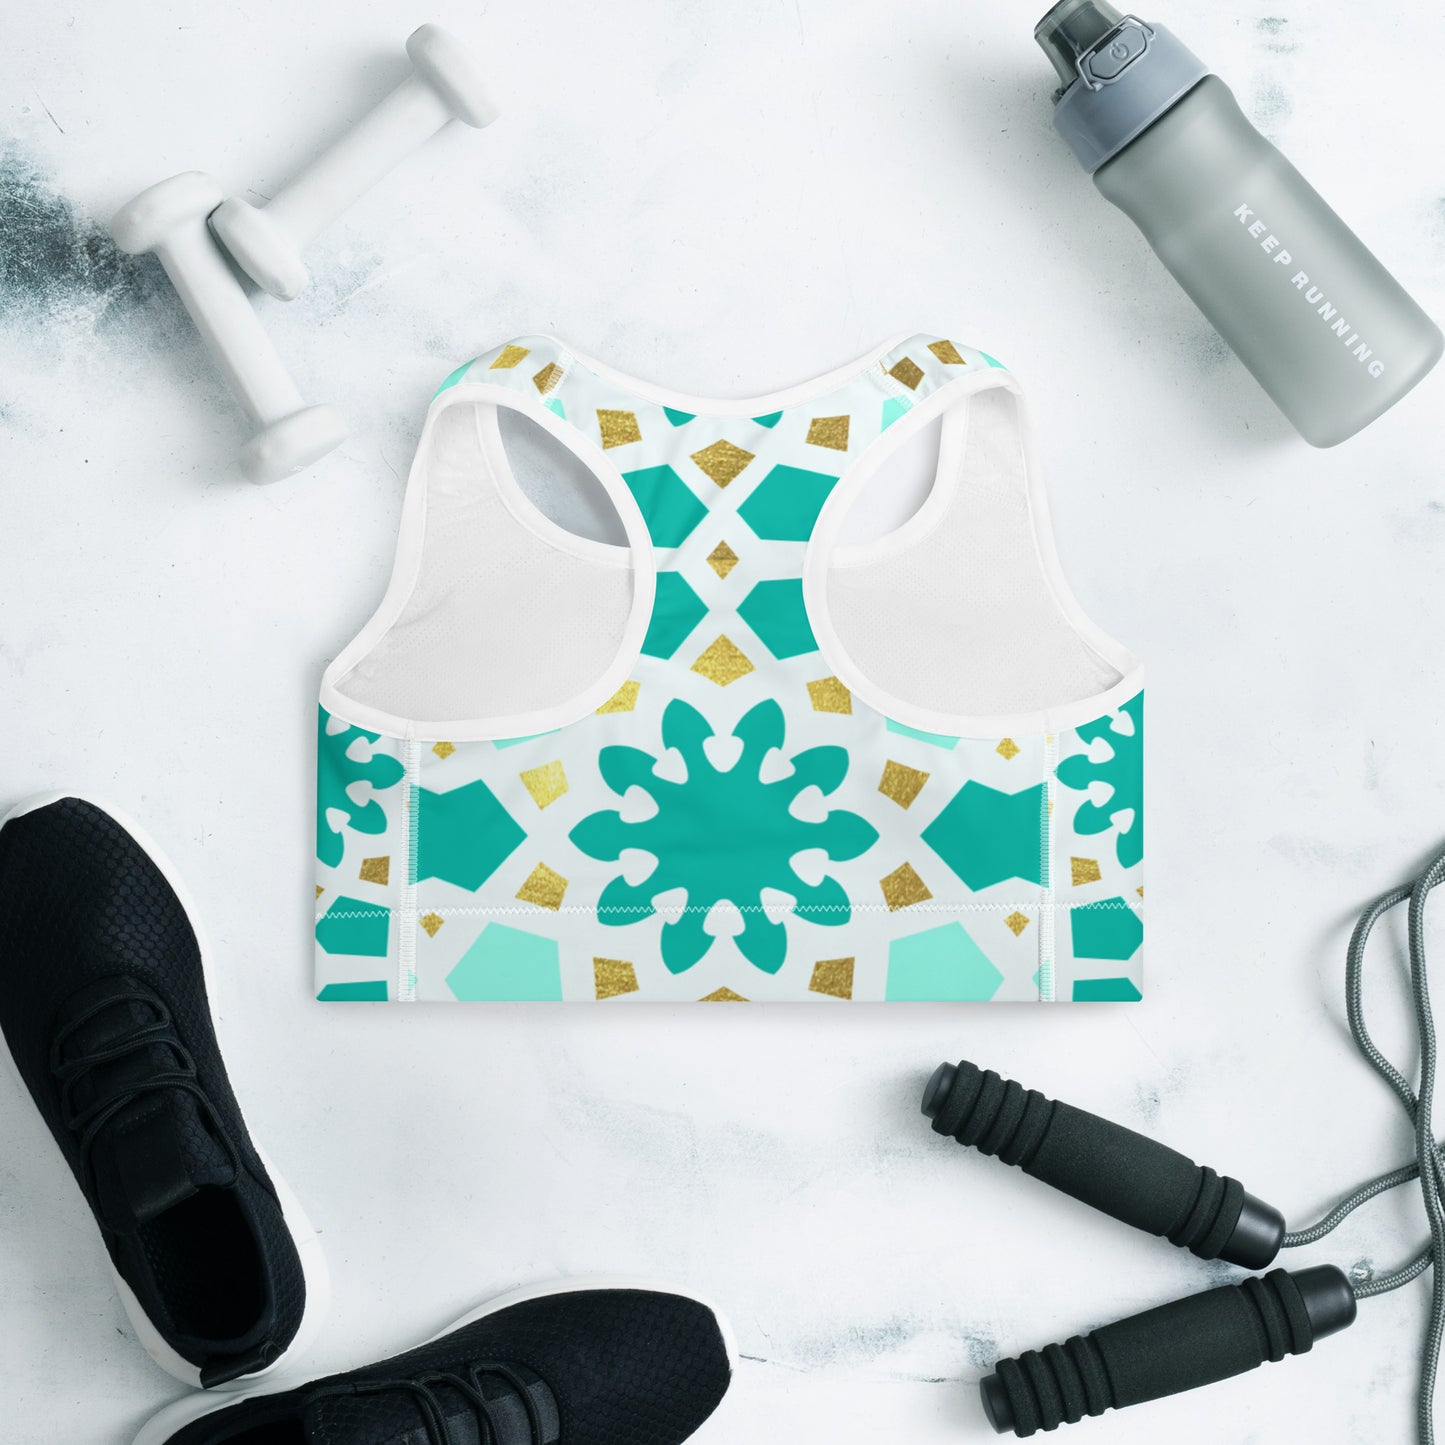 Padded Sports Bra - Geometric Arabesque Pattern in Mint and Gold